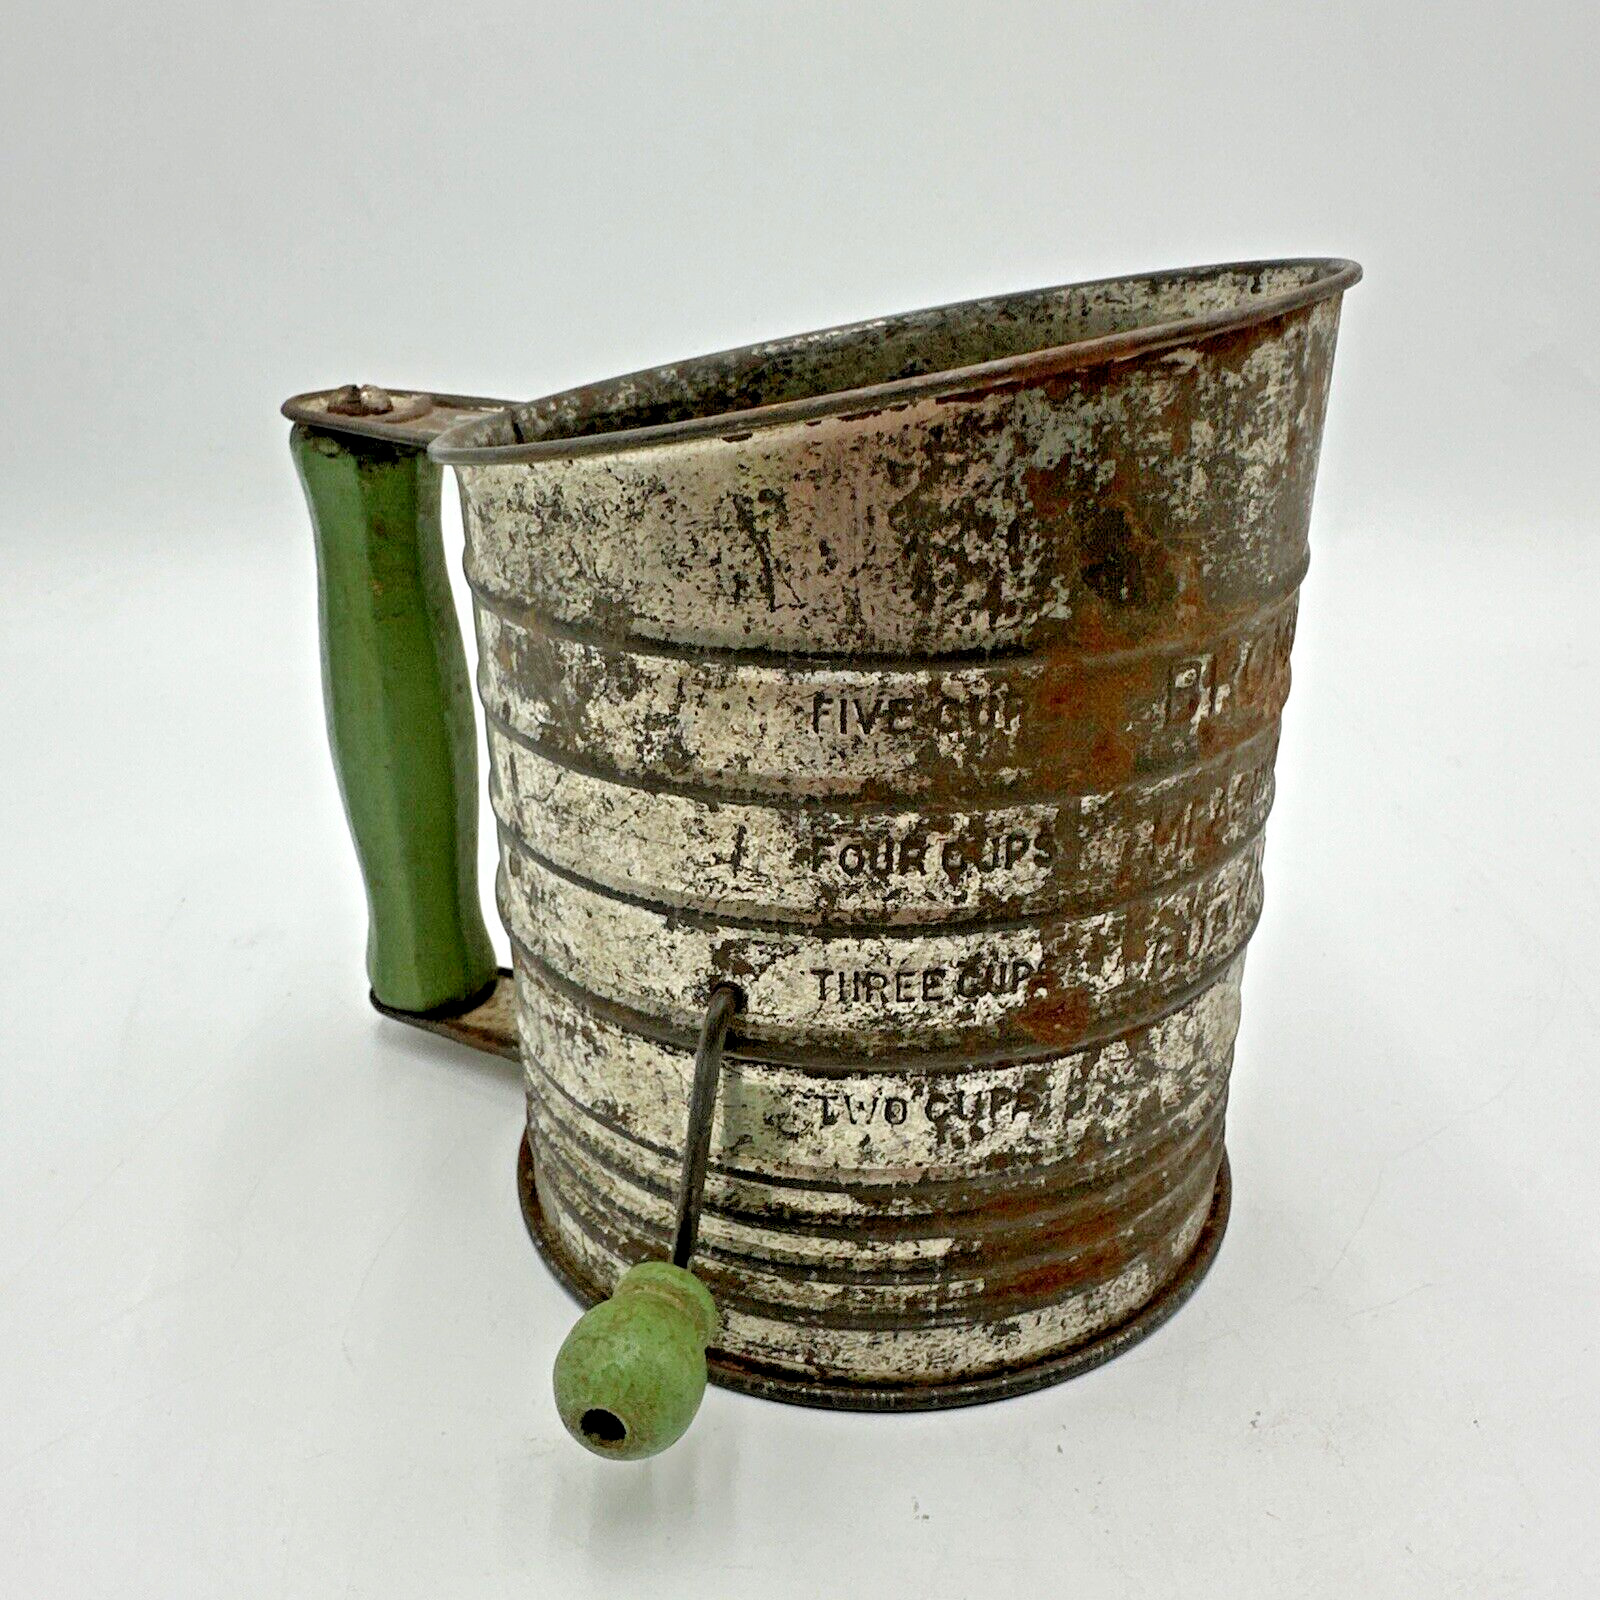 Vintage Bromwell’s 5 Cup Measuring Sifter Green Wood Crank Handle Flour Sifter